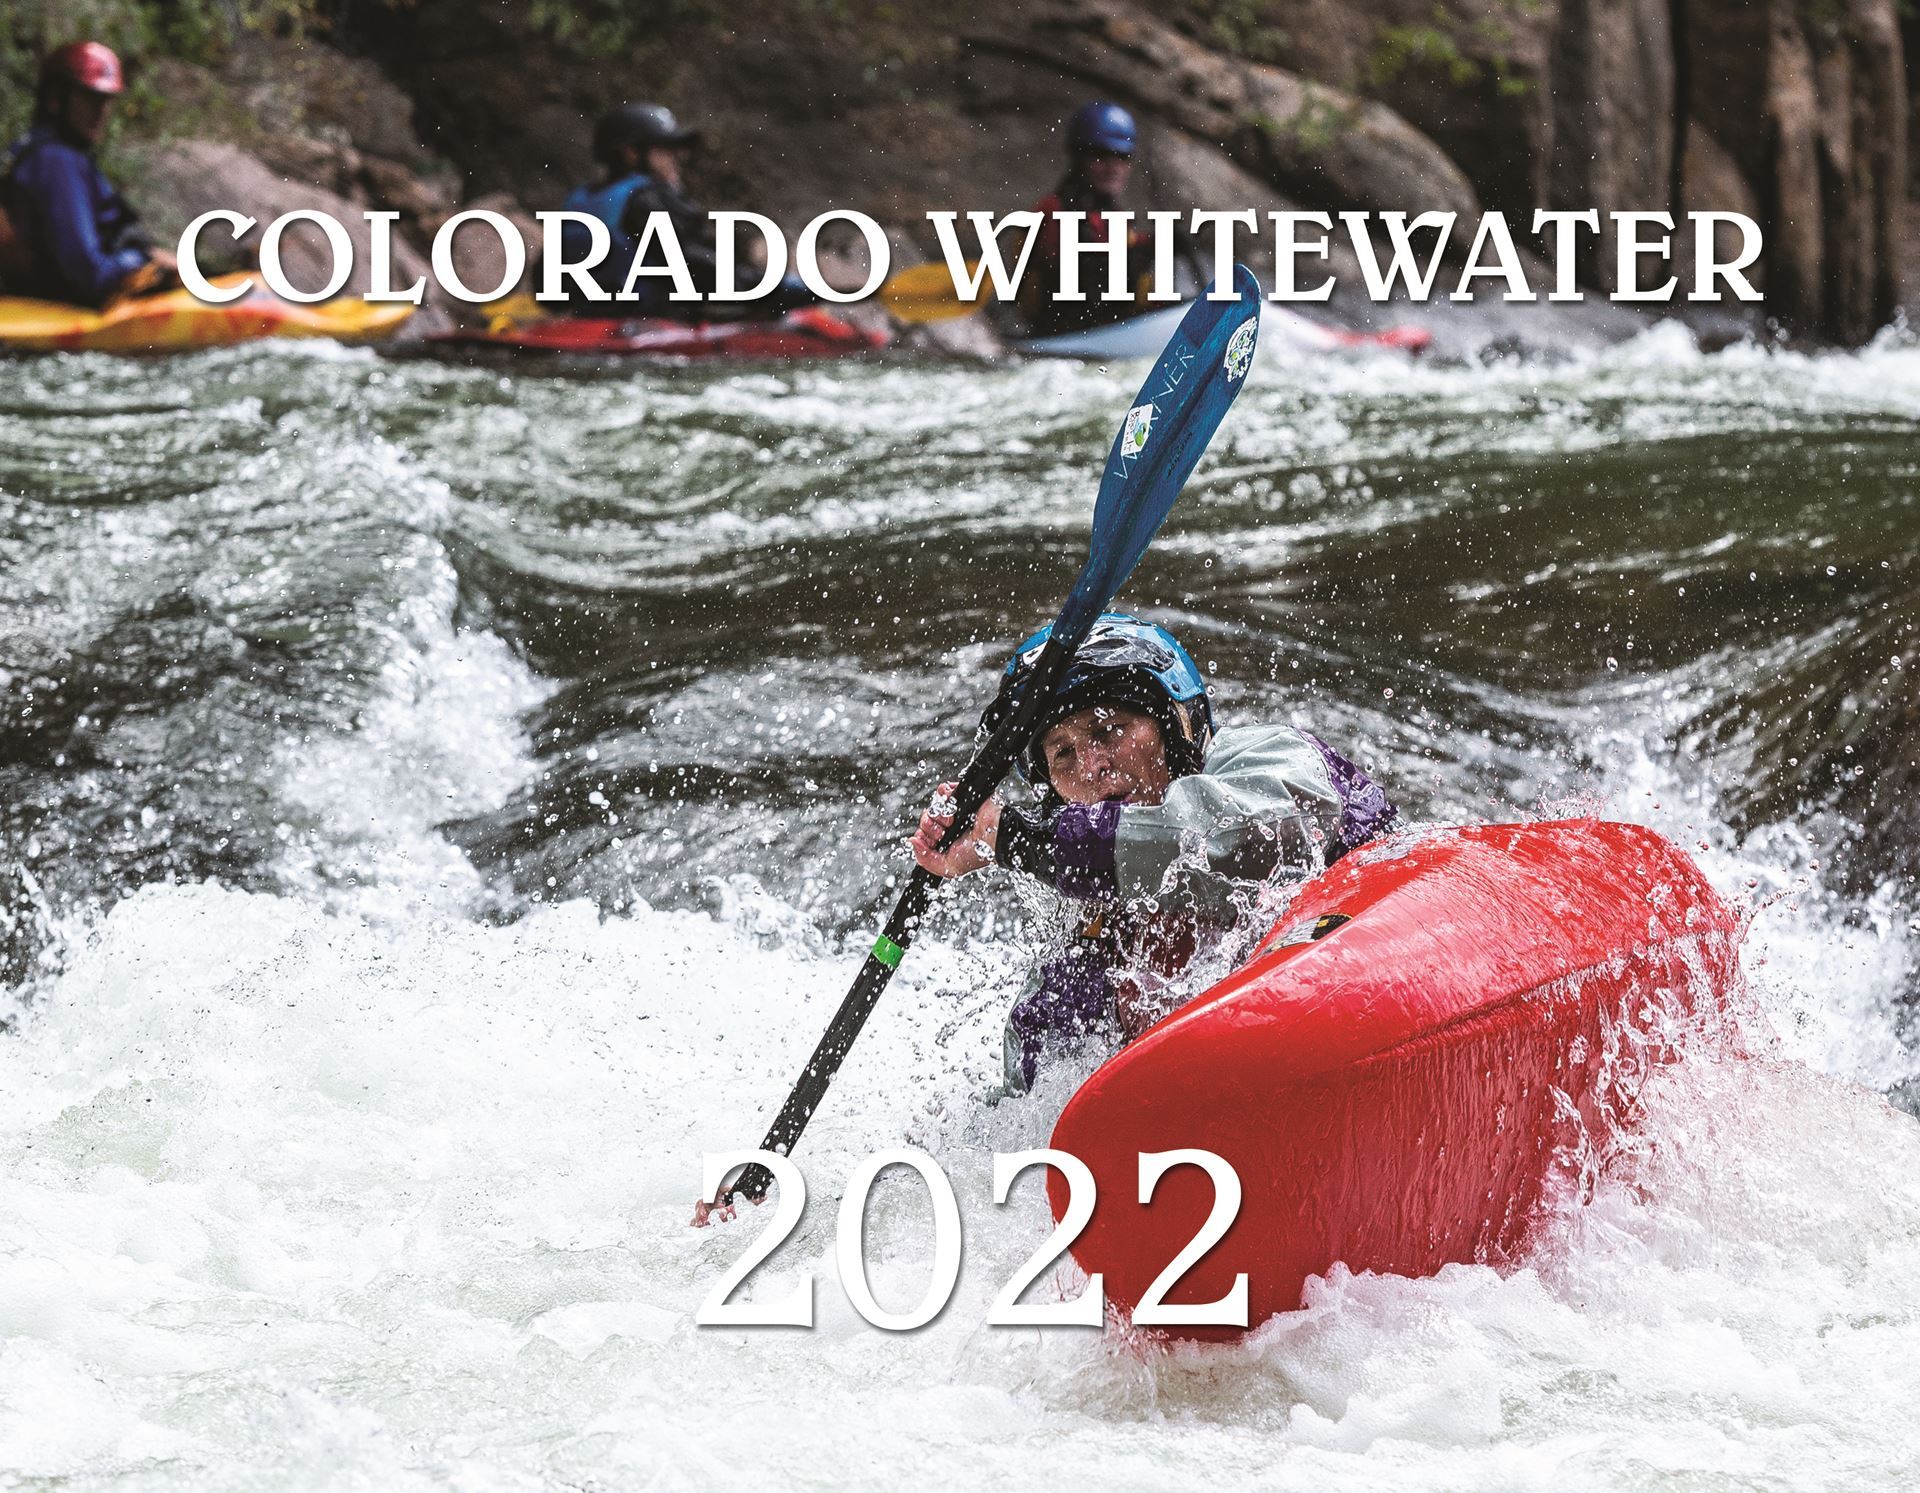 Colorado Whitewater 2022 Calendar - front cover